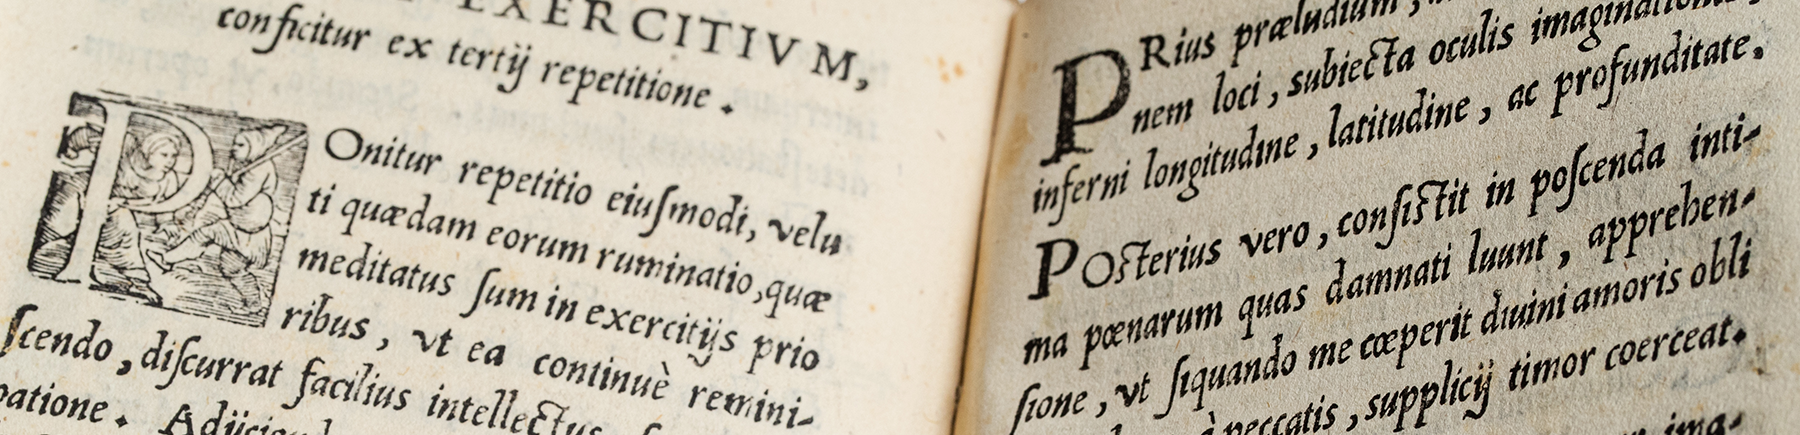 A close-up of two pages of a manuscript of St. Ignatius' spiritual exercises written in Latin